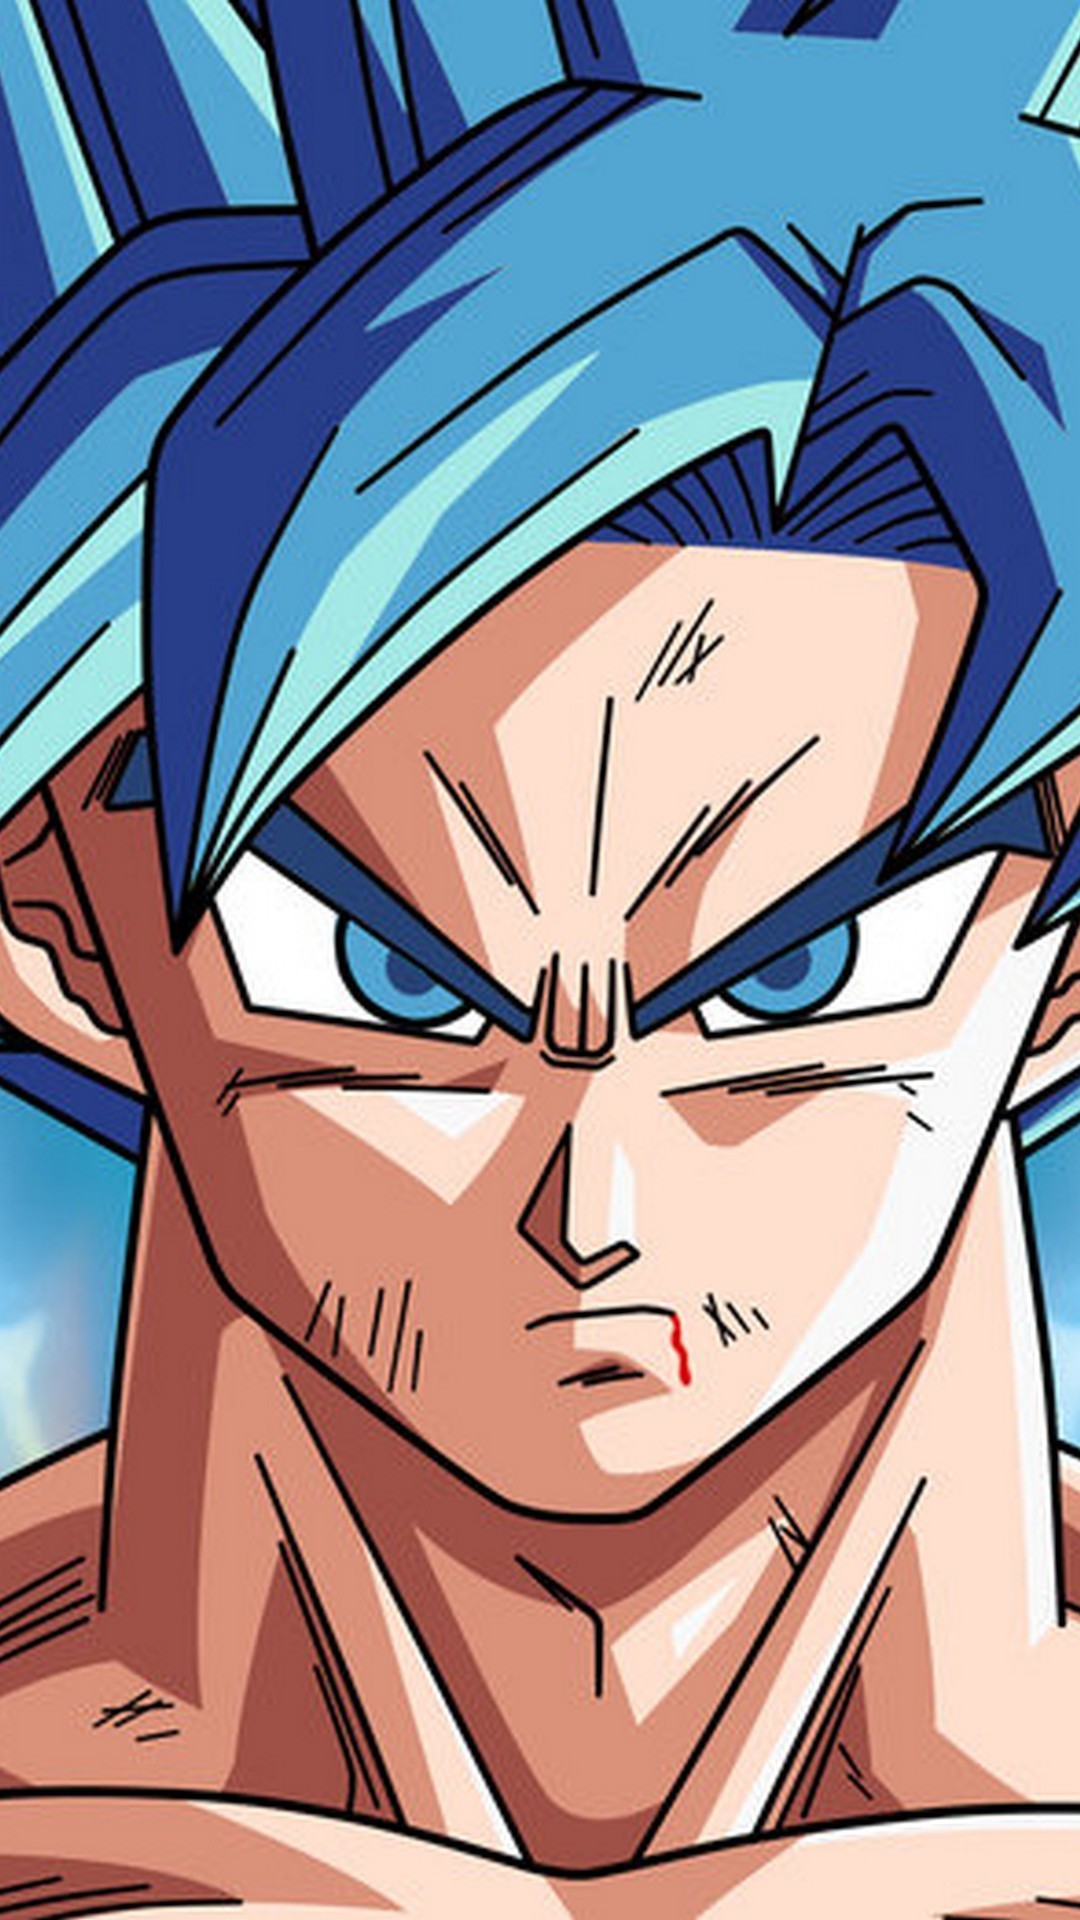 Goku SSJ Wallpaper For iPhone with image resolution 1080x1920 pixel. You can make this wallpaper for your iPhone 5, 6, 7, 8, X backgrounds, Mobile Screensaver, or iPad Lock Screen